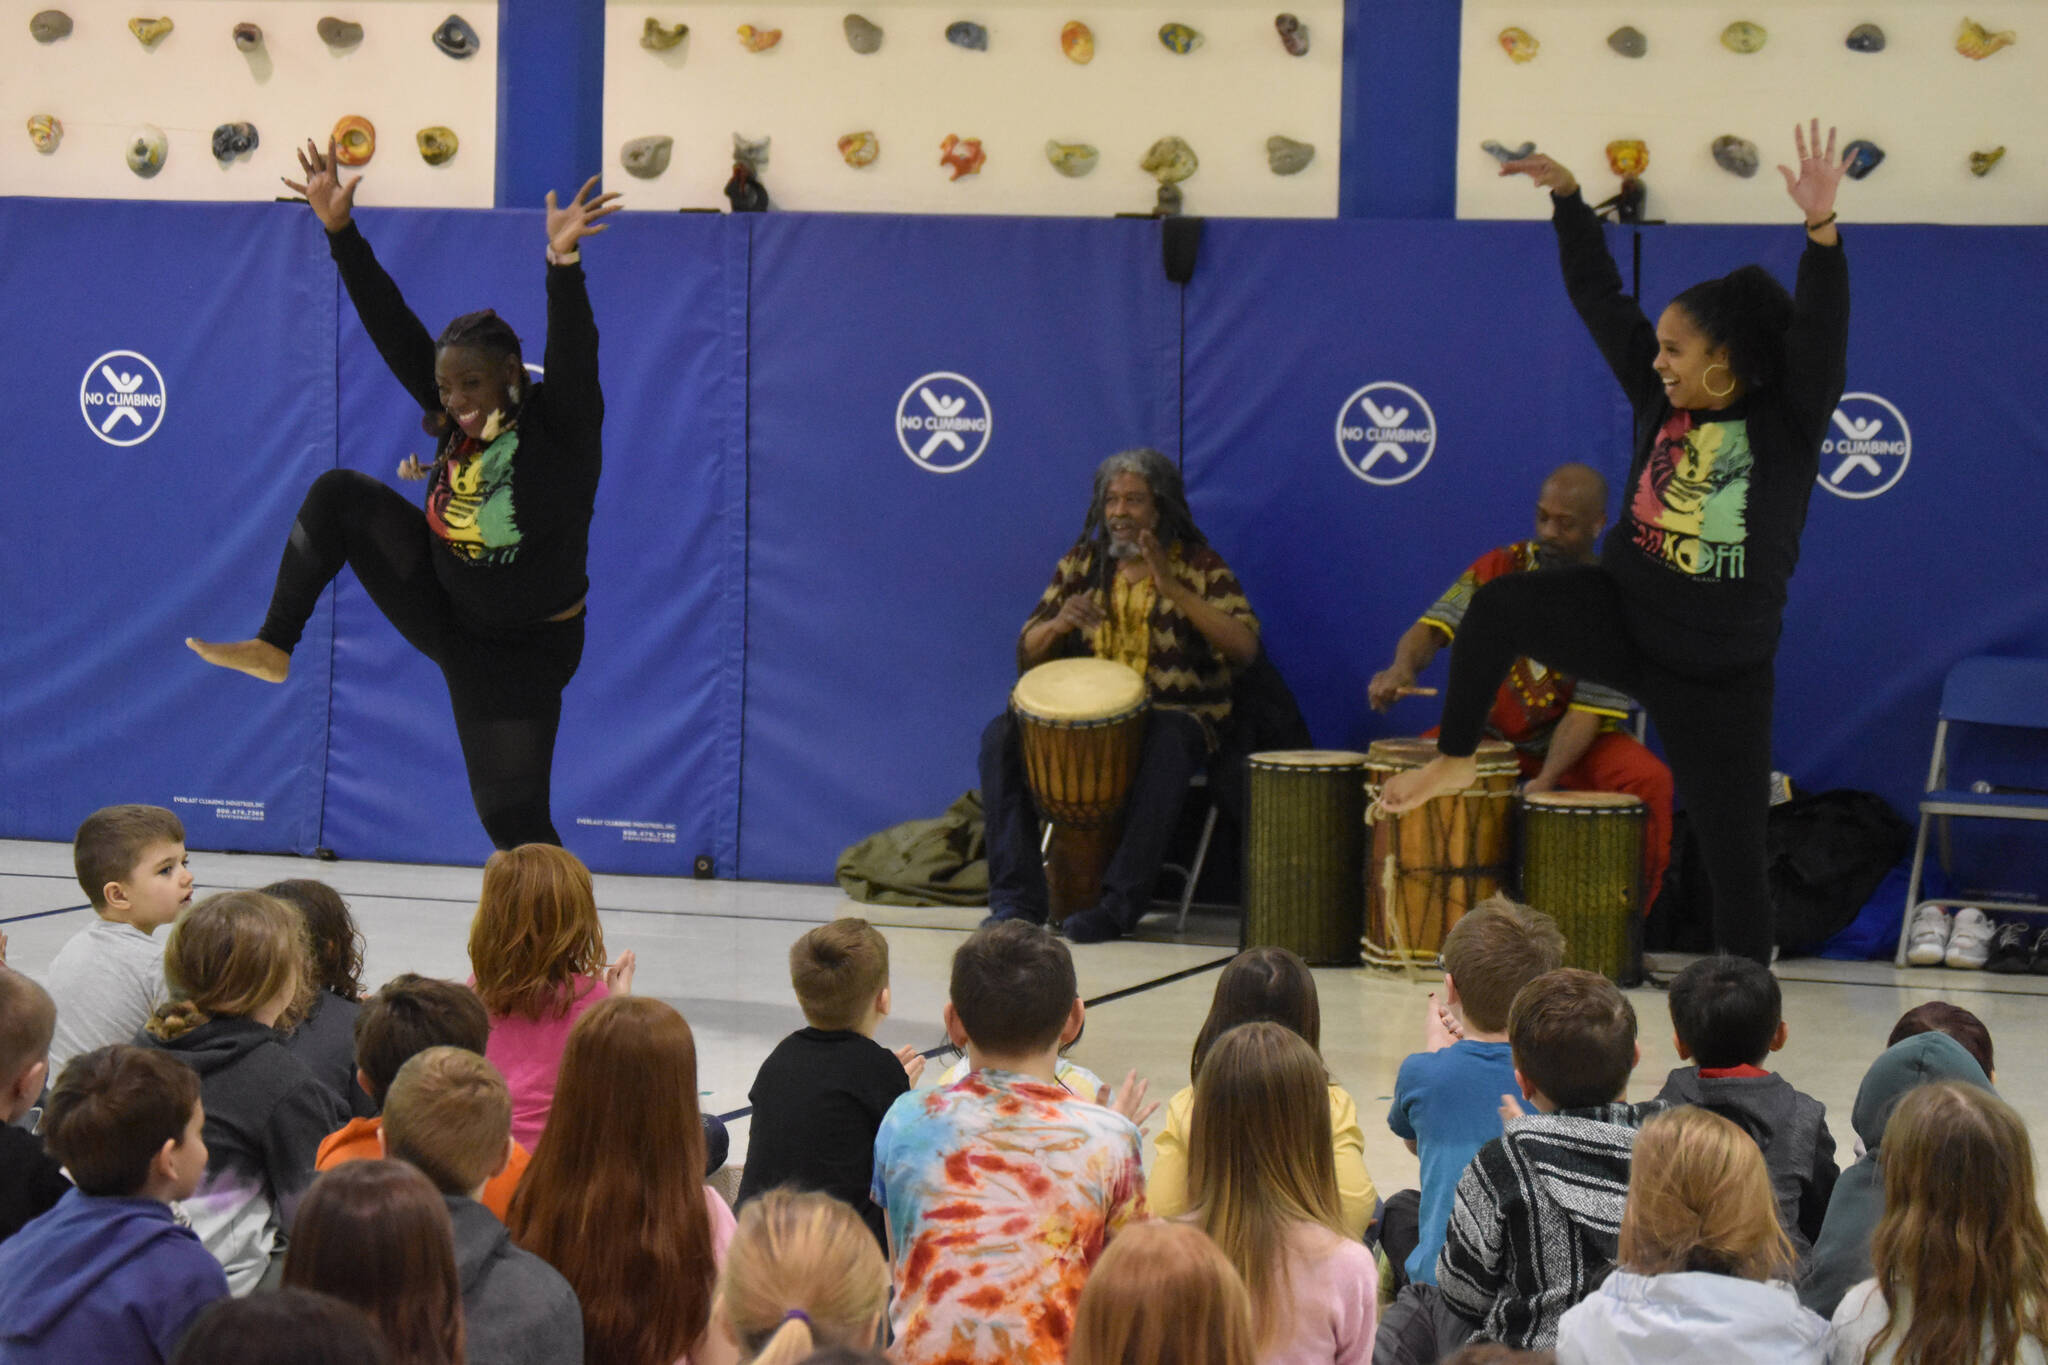 The members of Sankofa Dance Theater Alaska perform for a crowd of students during an opening performance at Kaleidoscope School of Arts and Science in Kenai, Alaska on Monday, March 20, 2023. (Jake Dye/Peninsula Clarion)